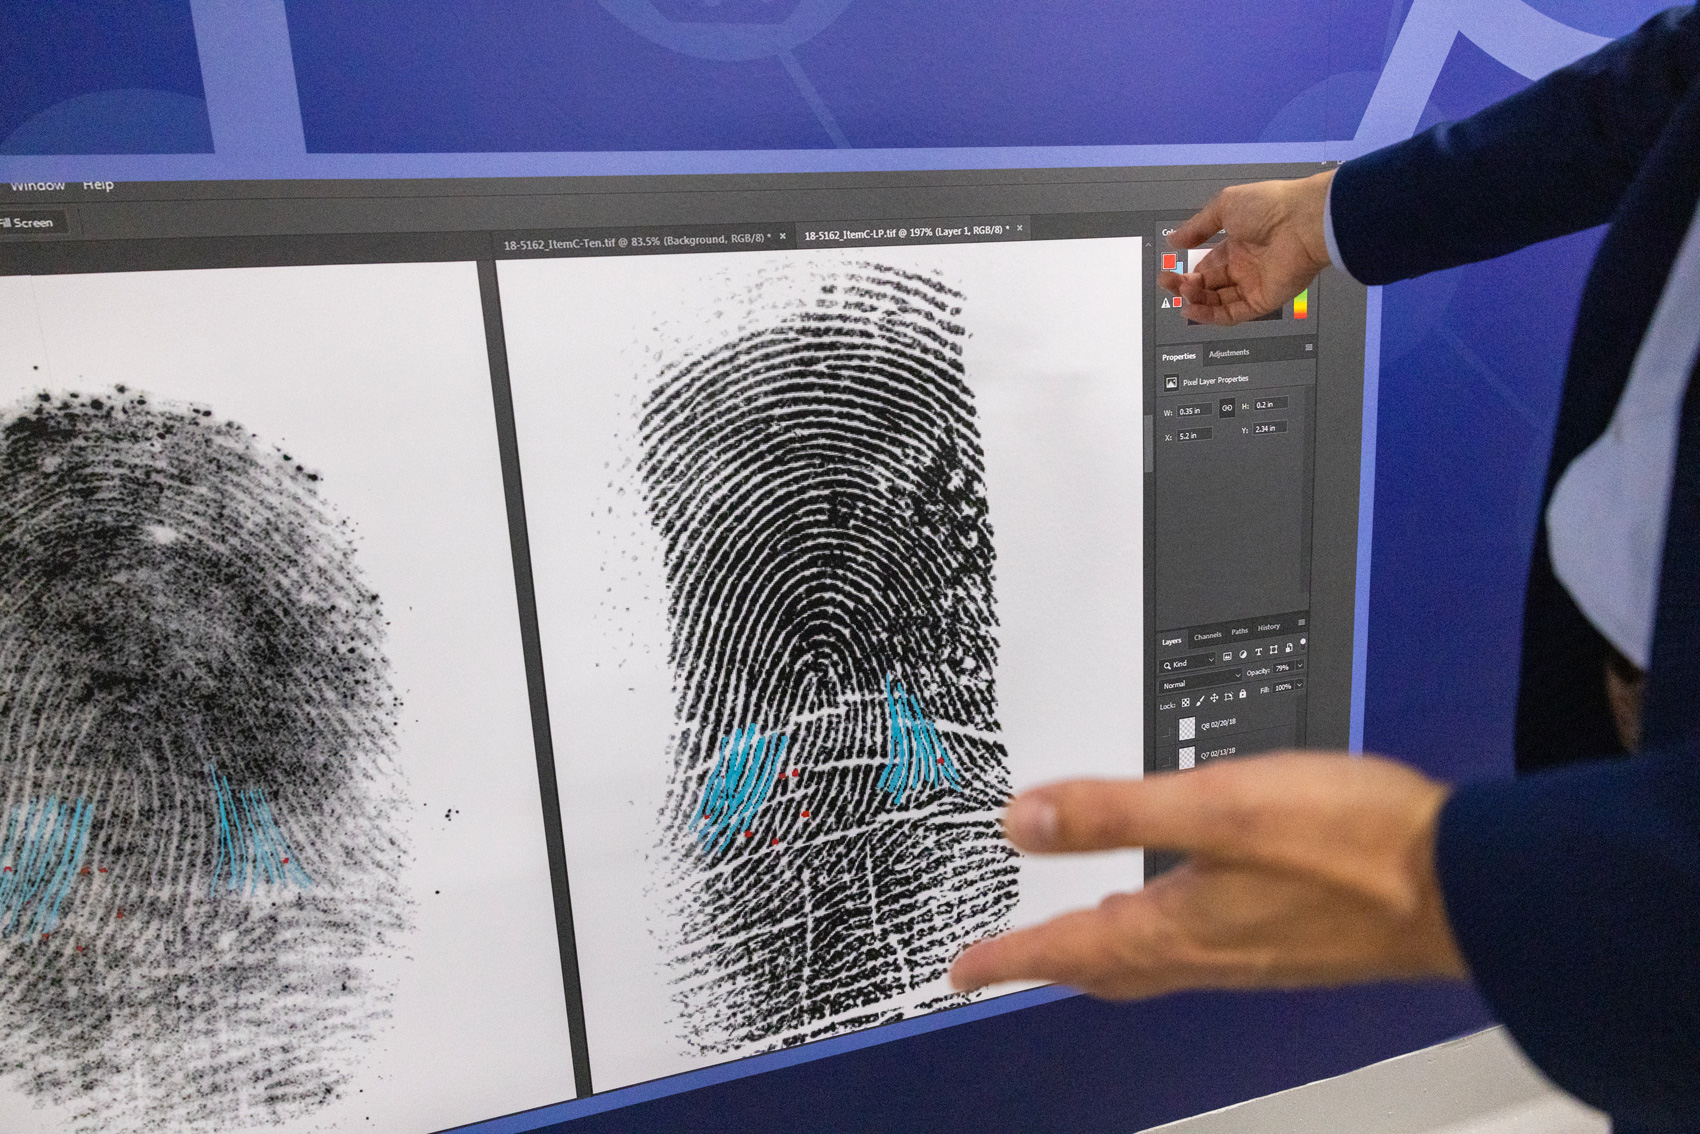 Peter Stout, chief executive officer of the Houston Forensic Science Center, points toward a graphic of a fingerprint at the Houston crime lab, which faces backlogs for evidence testing.